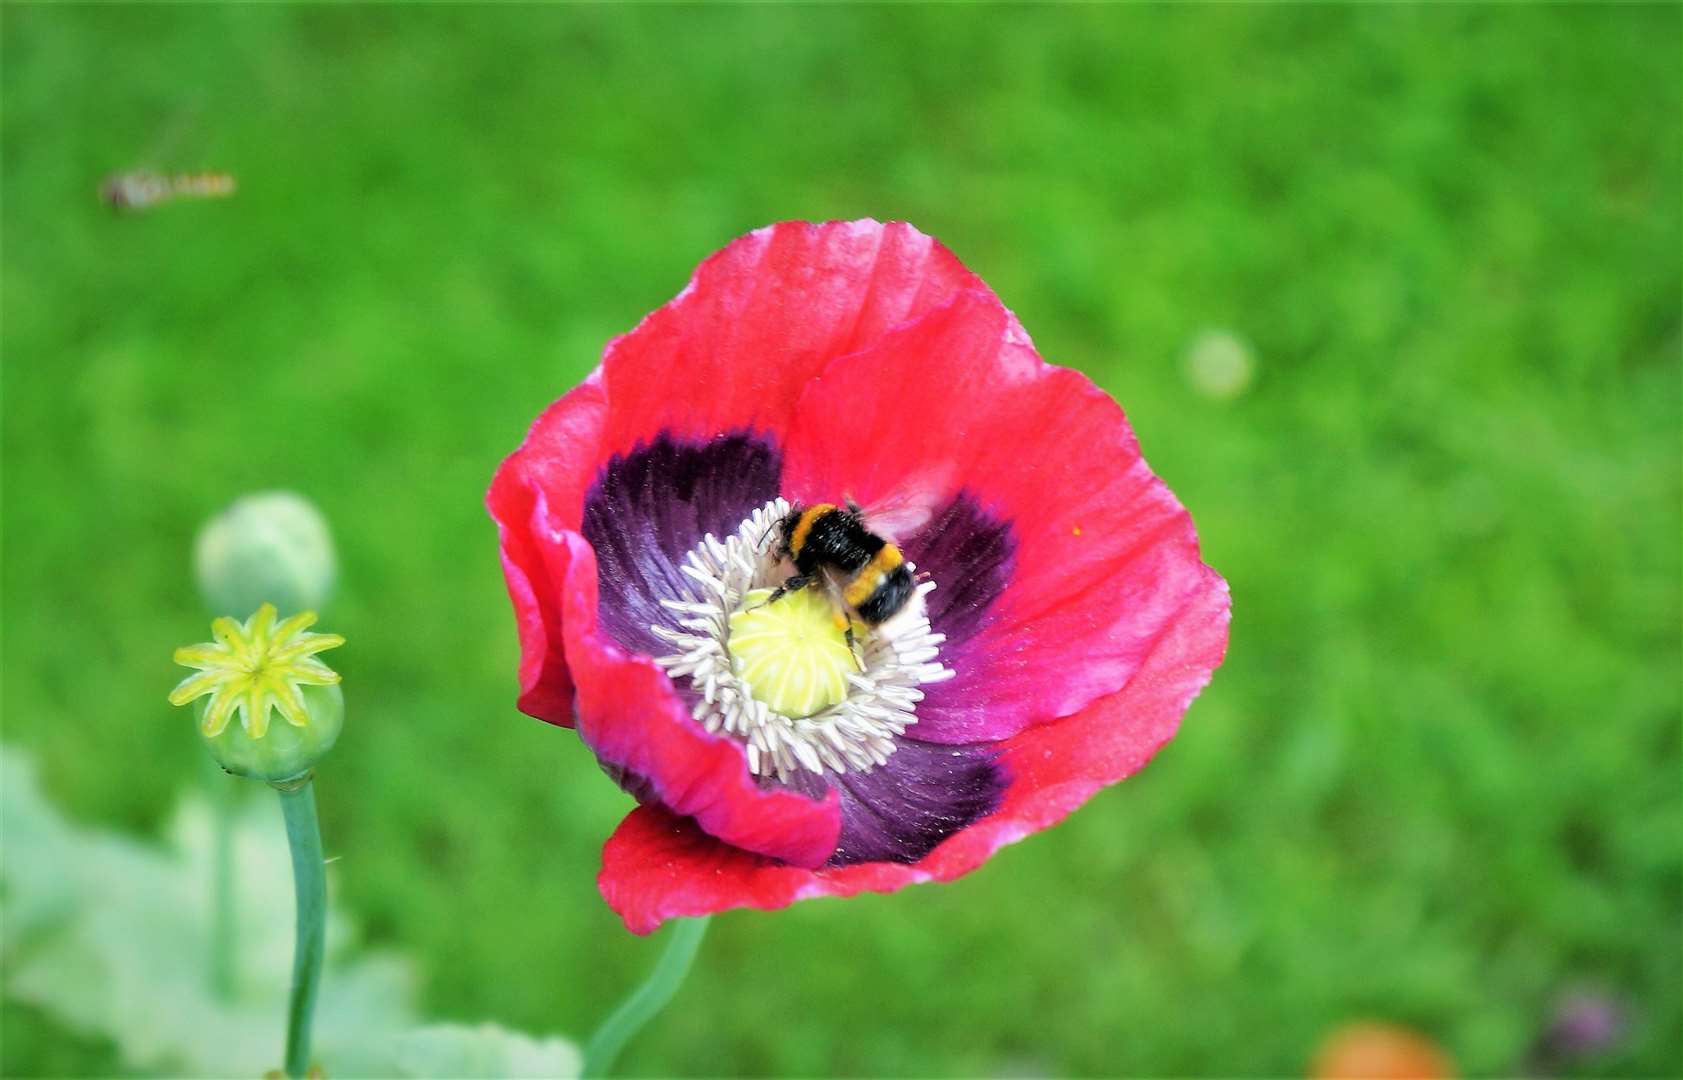 Growing a variety of flowers in the garden can help bees as well.